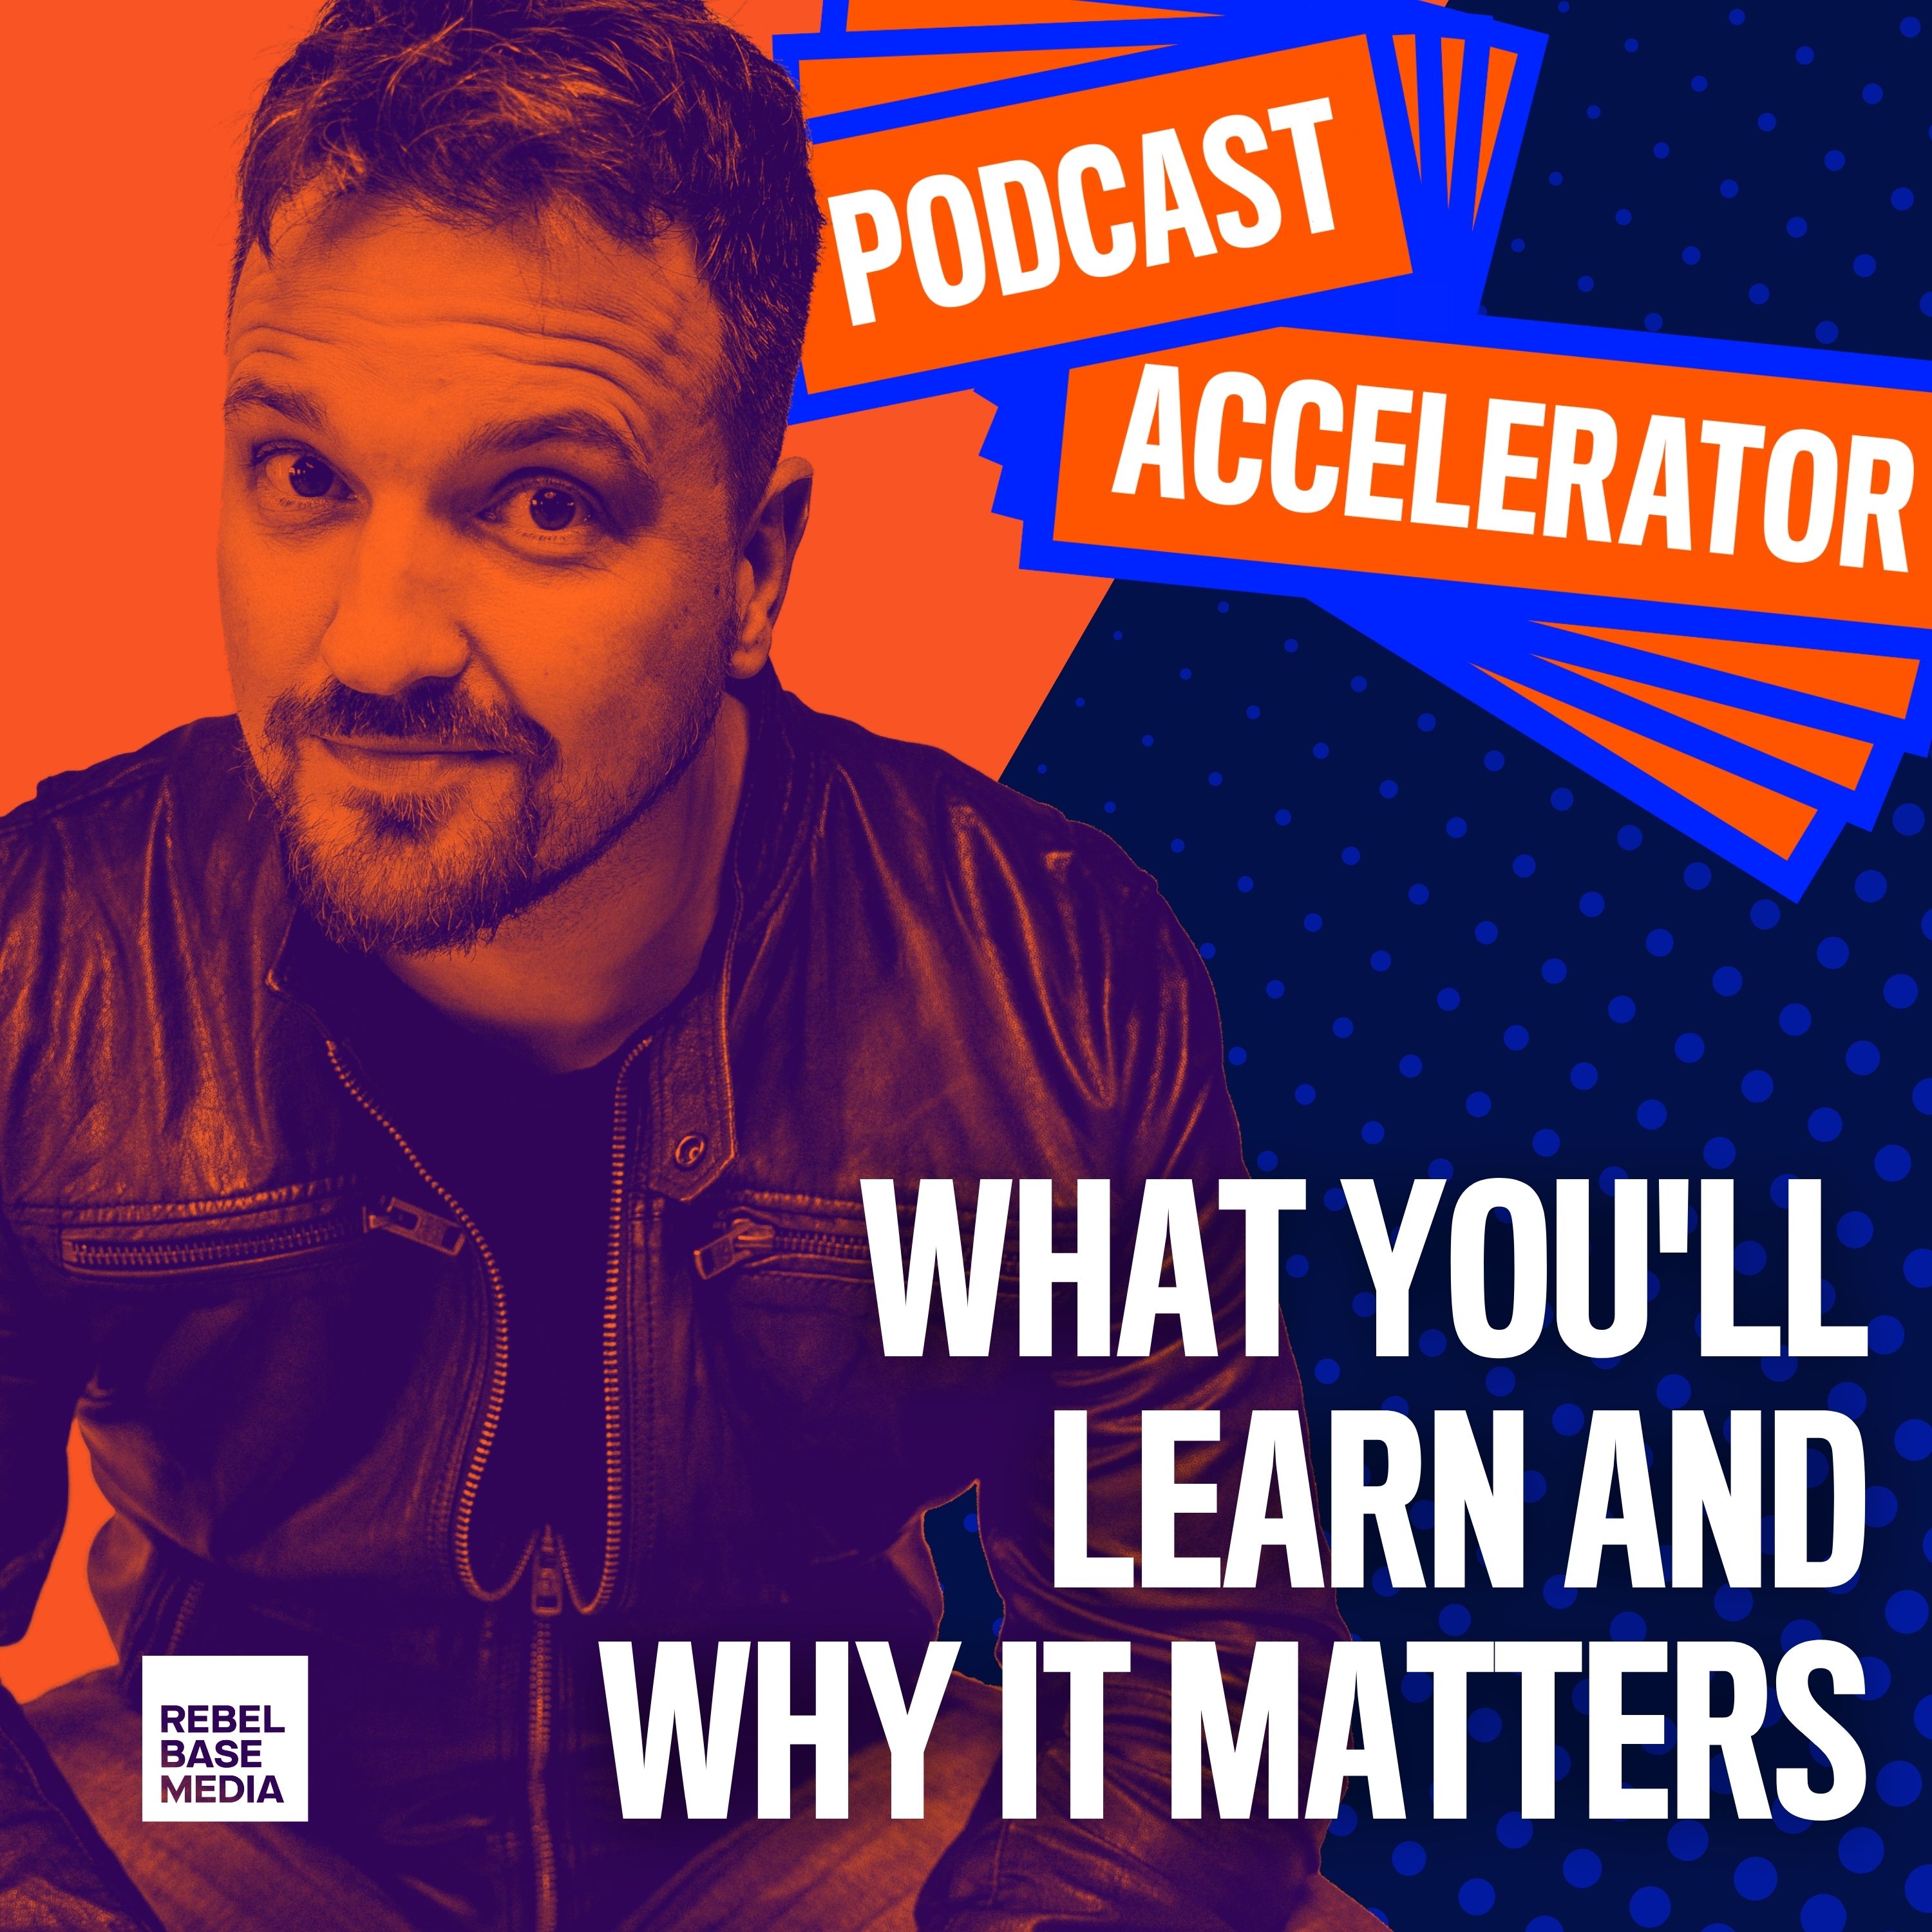 Artwork for podcast The Podcast Accelerator, Learn How to Grow Your Podcast